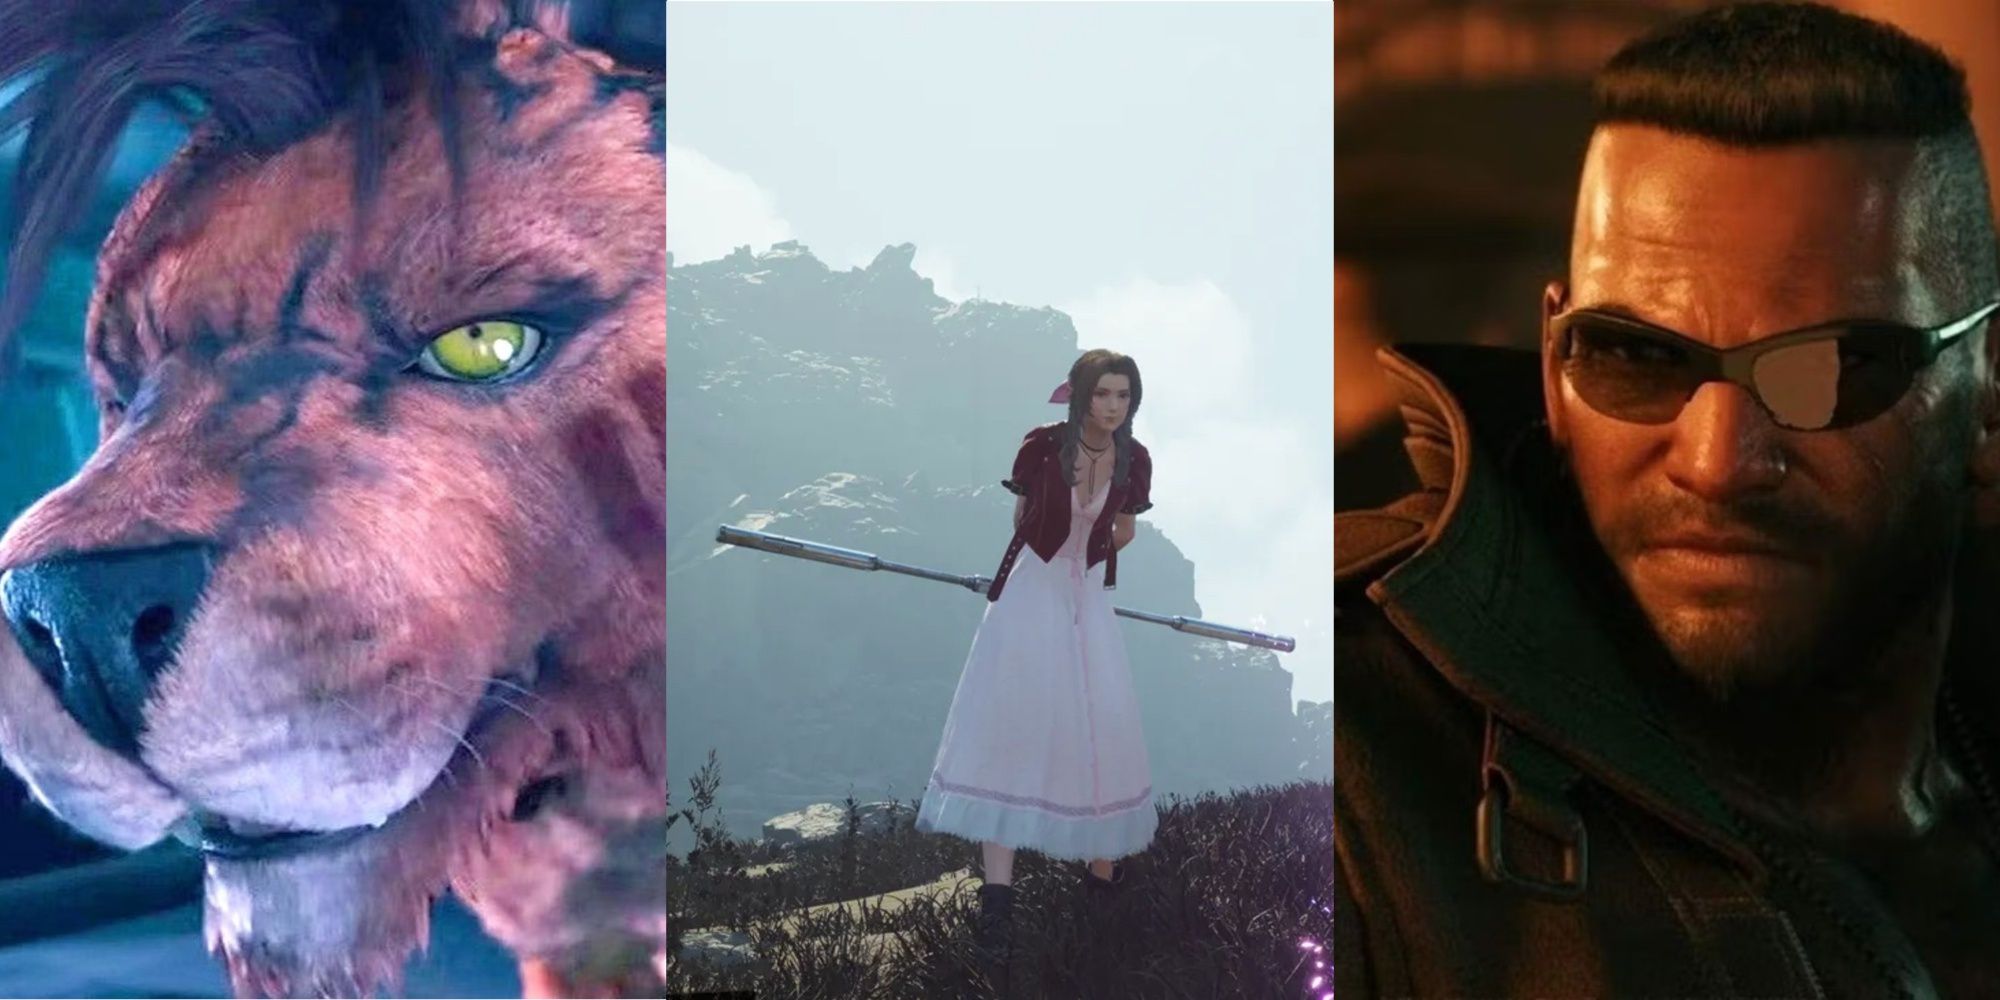 Red 13 left, Aerith Middle, Barret Right in Final Fantasy 7 Remake